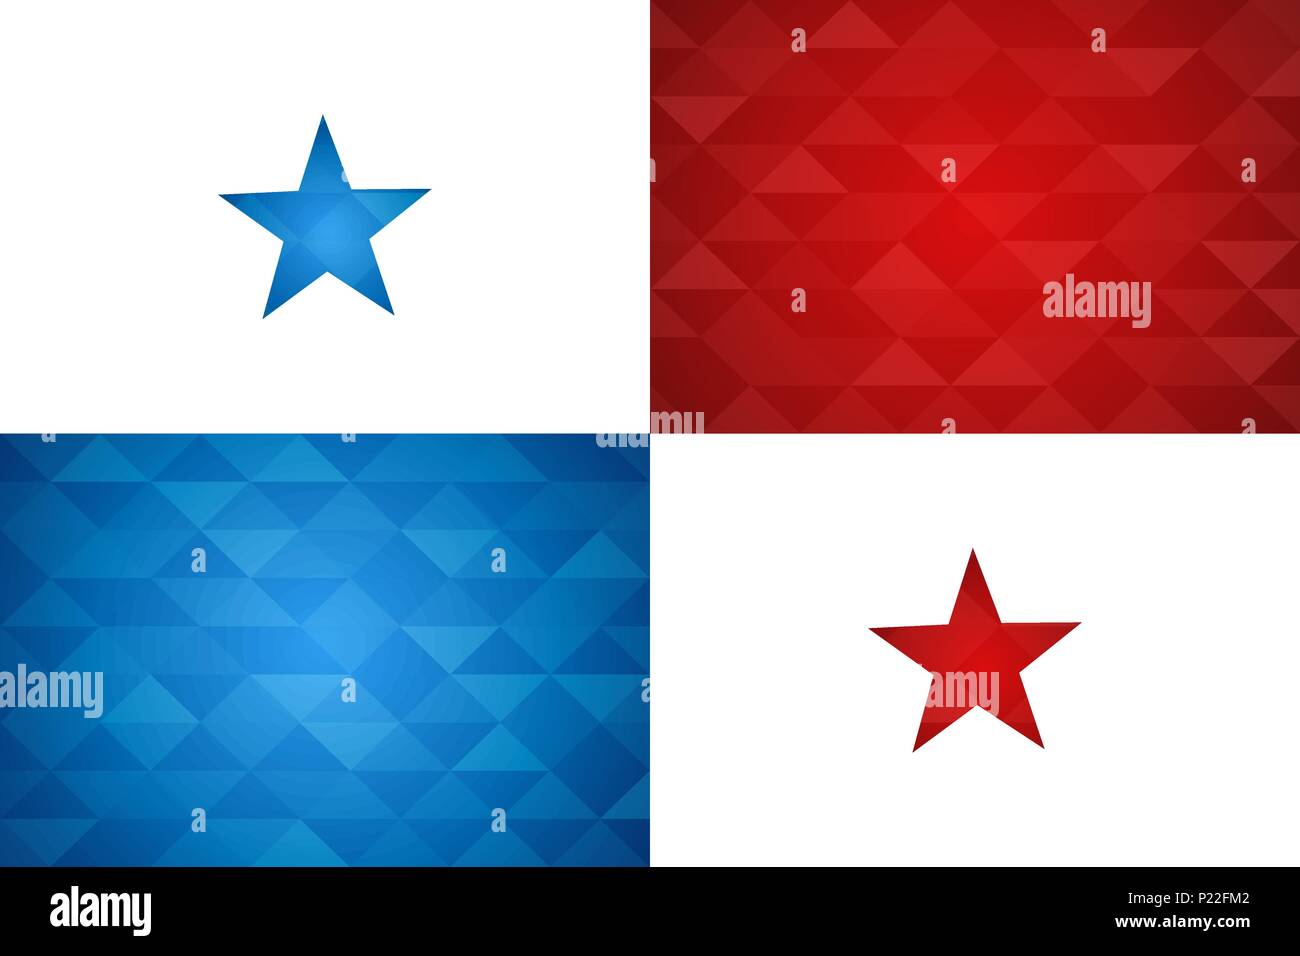 Panama flag for special country event with geometric triangle background. International panamanian nation template. EPS10 vector. Stock Vector